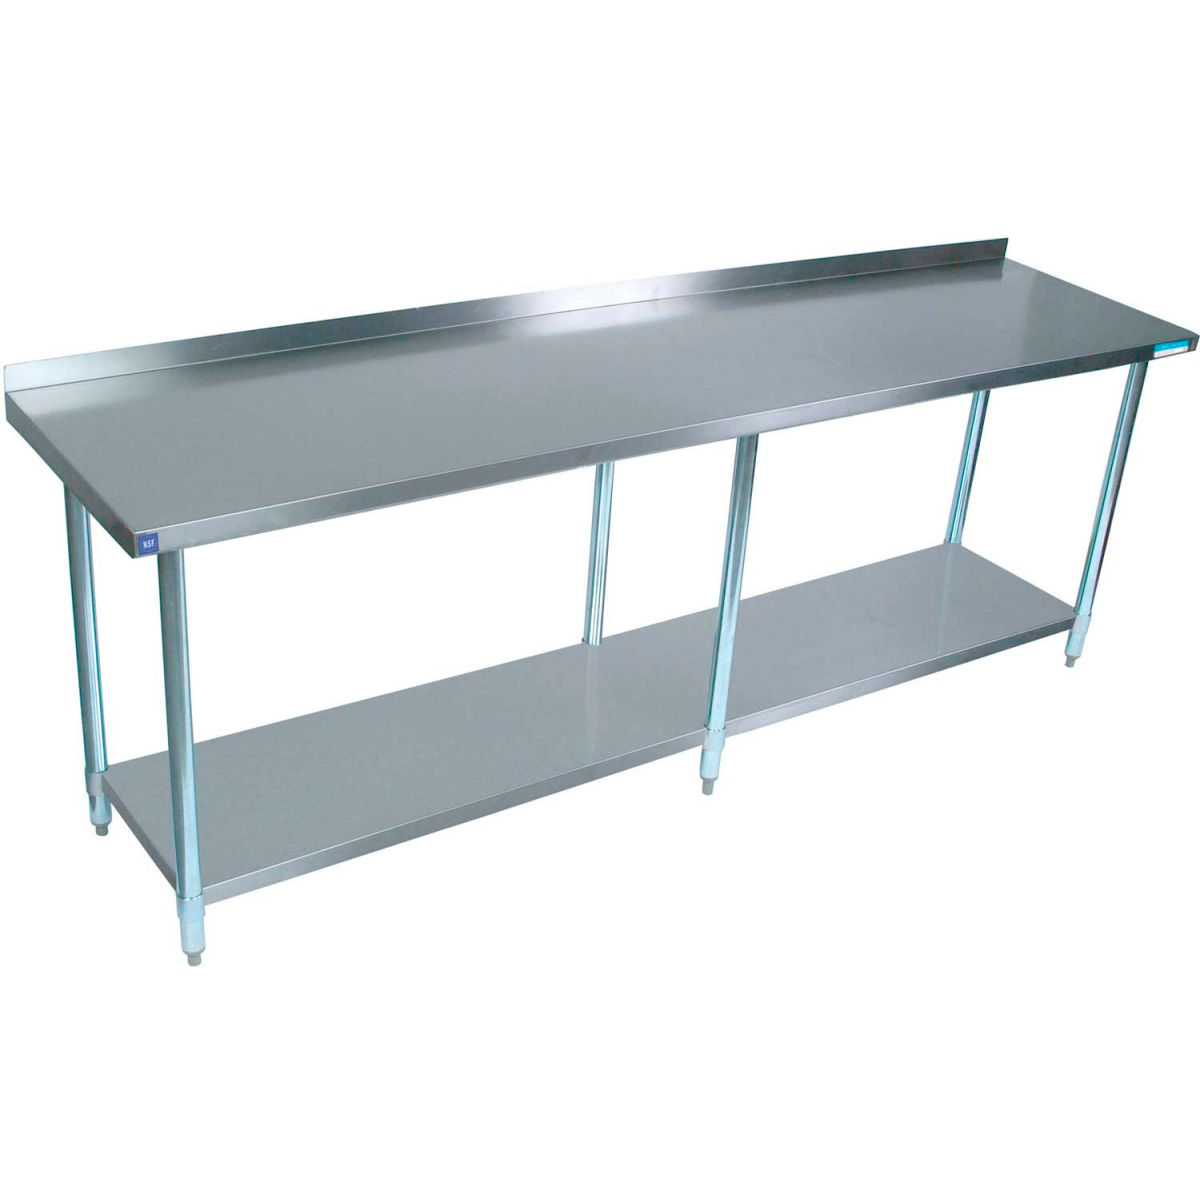 Picture of BK Resources B0899439 18 Gauge 430 Series Stainless Workbench with Undershelf & 1.5 in. Backsplash - 96 x 24 in.